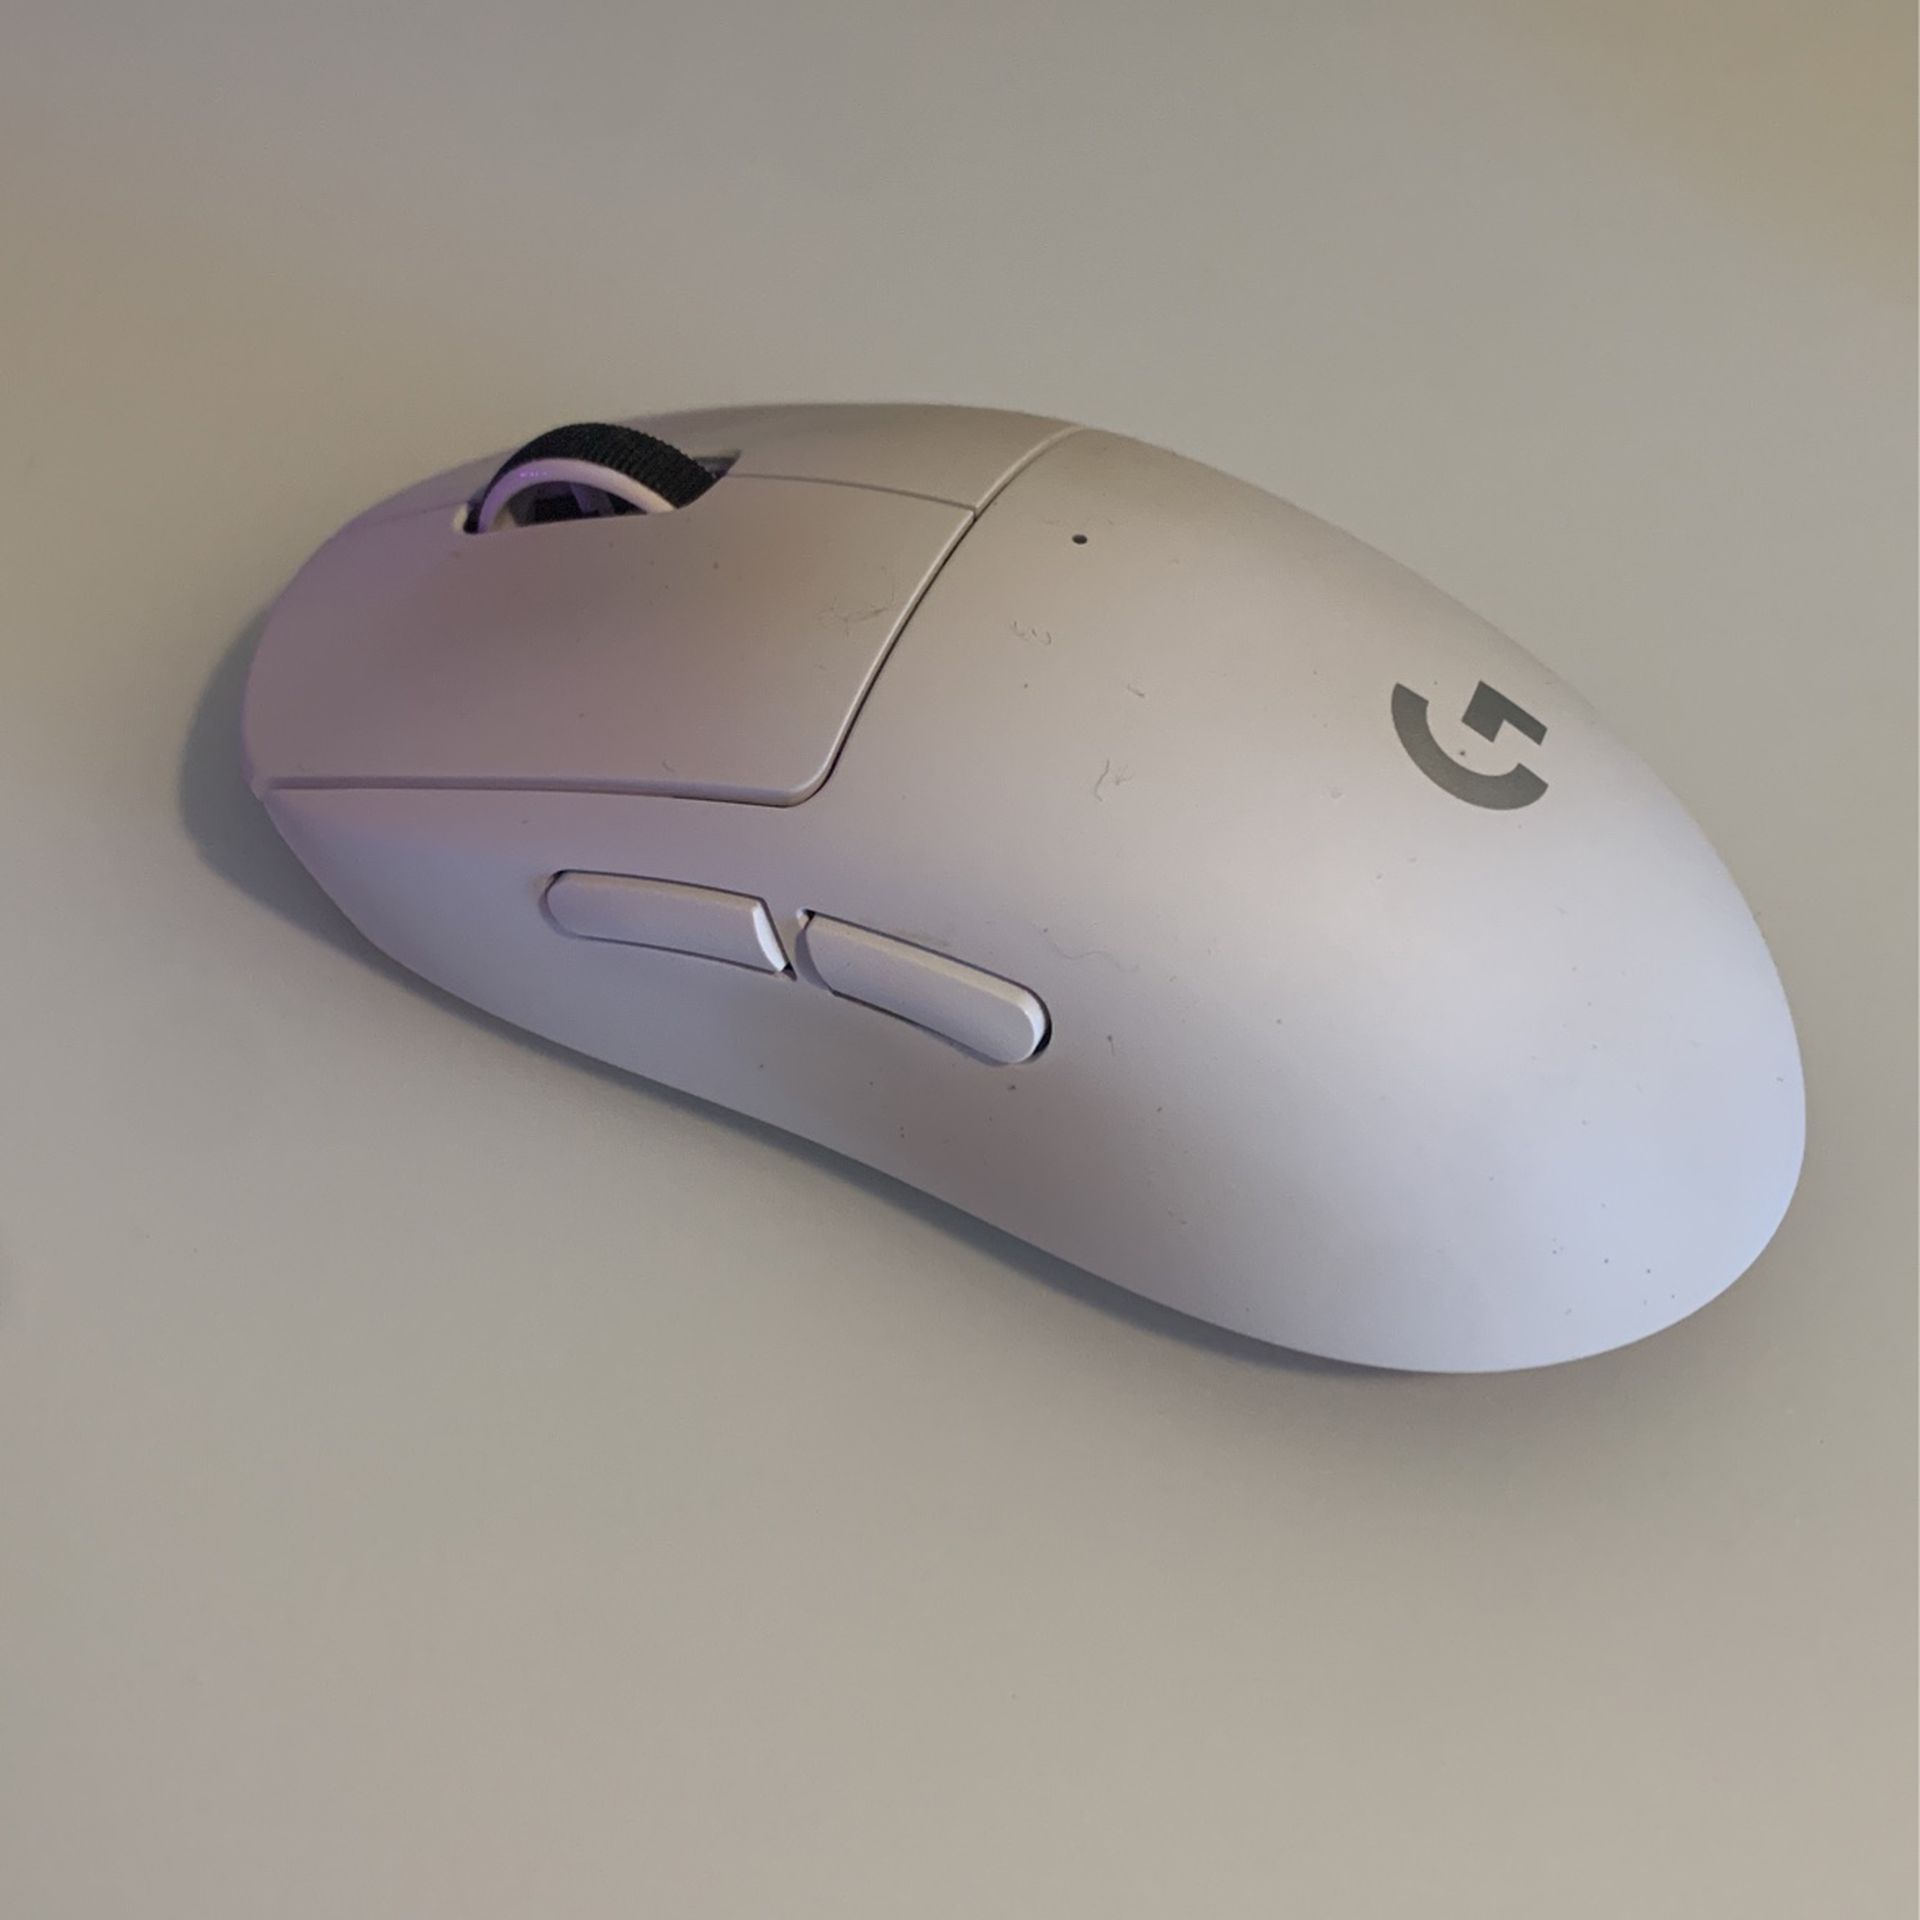 G Pro Superlight 2 Wireless Gaming Mouse